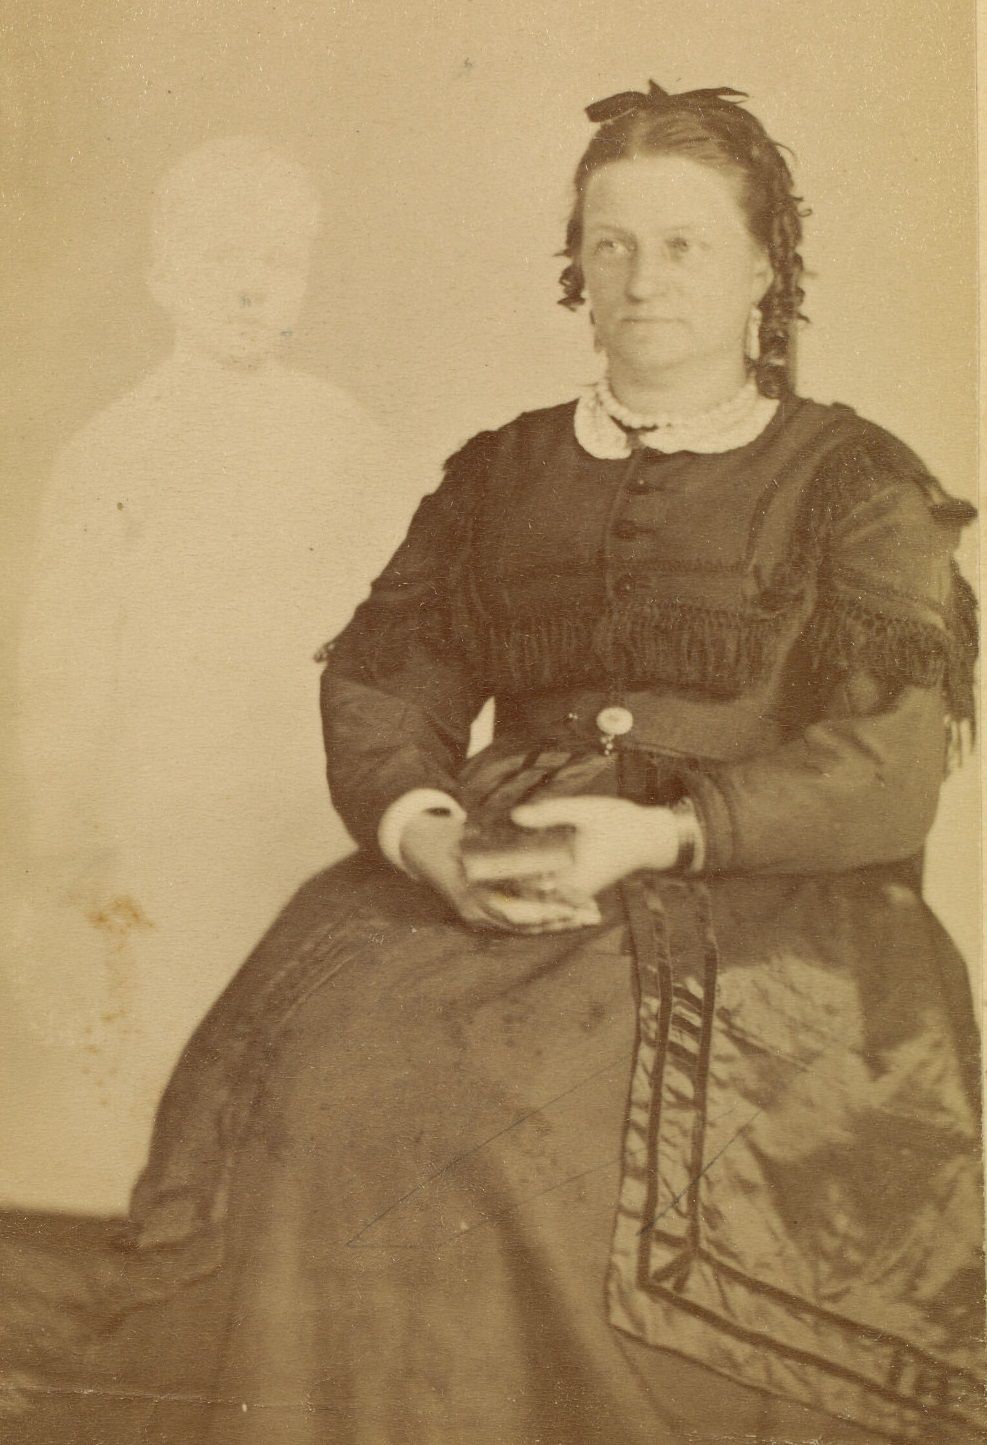 Portrait of Mrs. French, wearing a dark dress, holding a book in her lap. The faint image of a boy appears beside her.